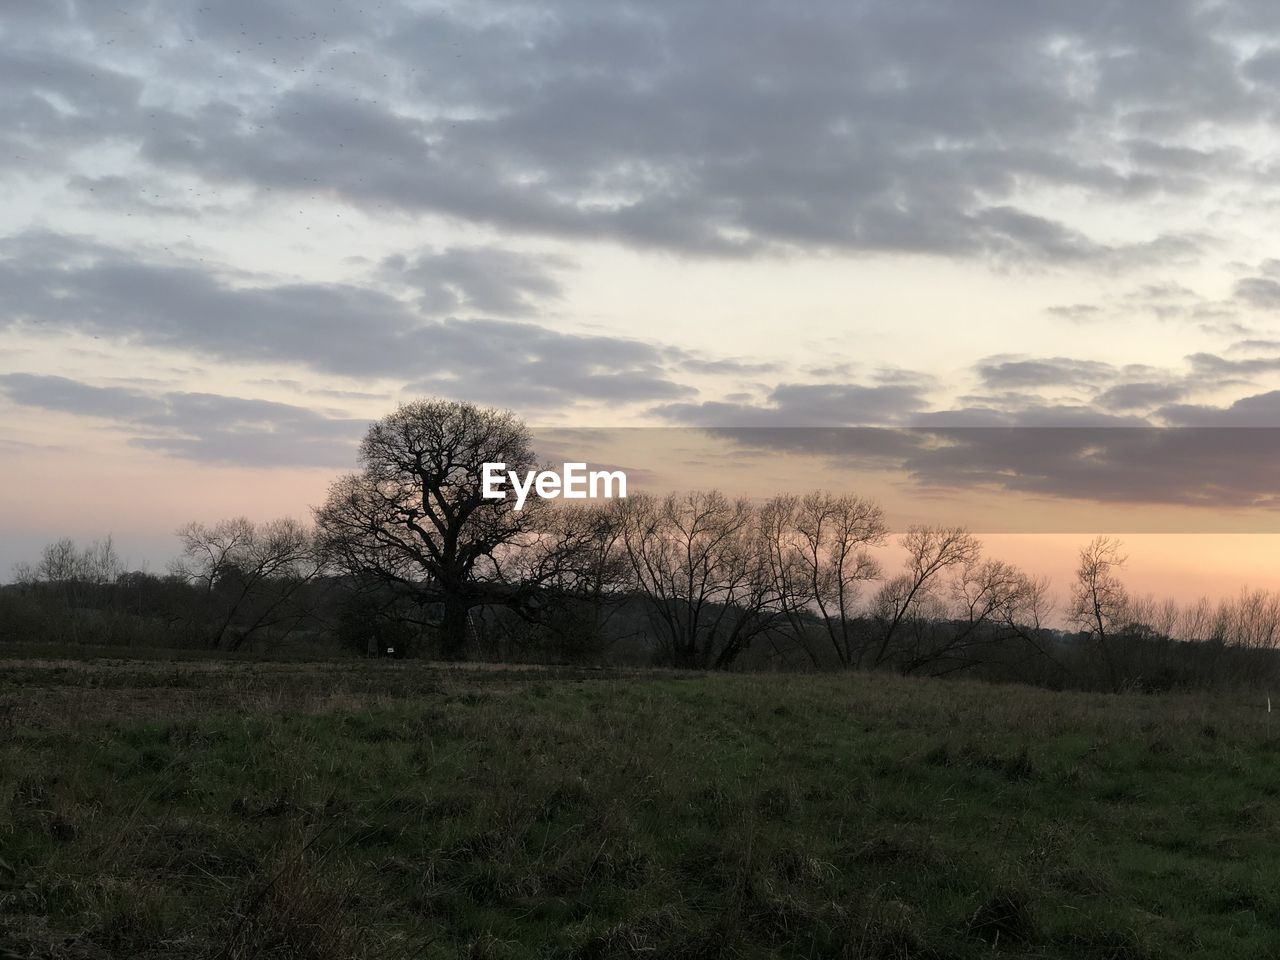 BARE TREES ON FIELD DURING SUNSET